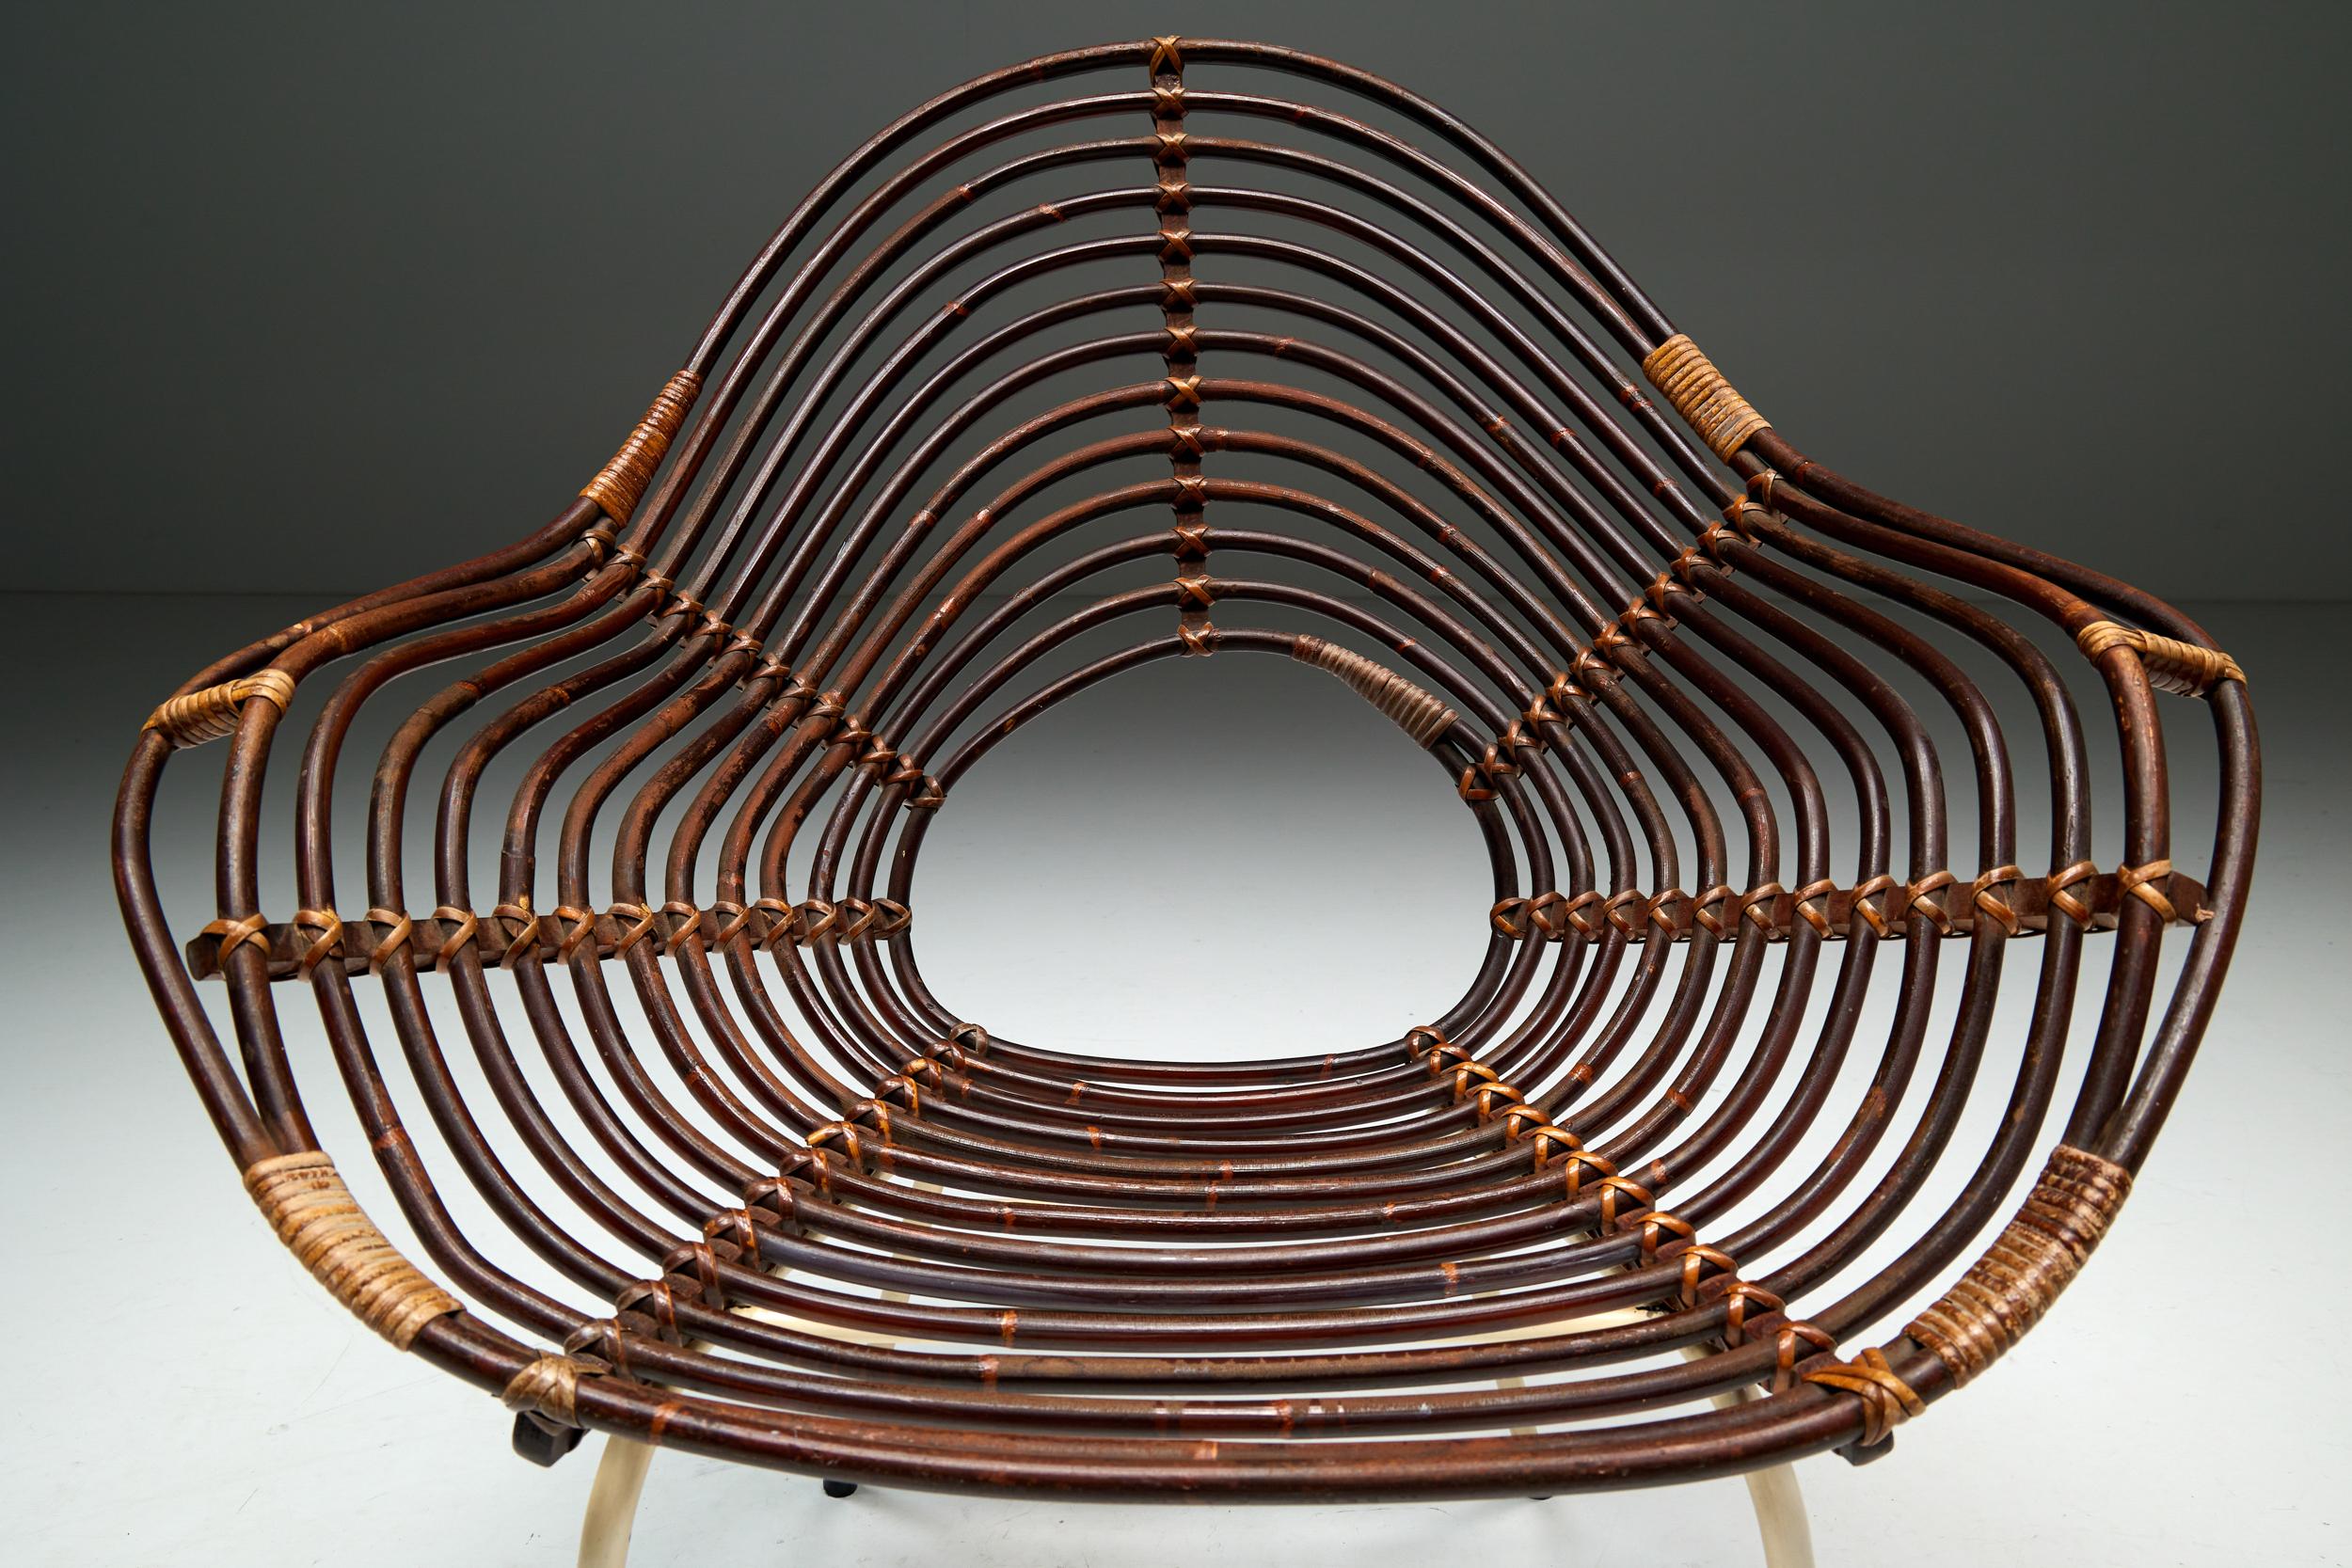 Dutch Rattan Chair by H. Broekhuizen for Rohé Noordwolde, Netherlands, 1960s For Sale